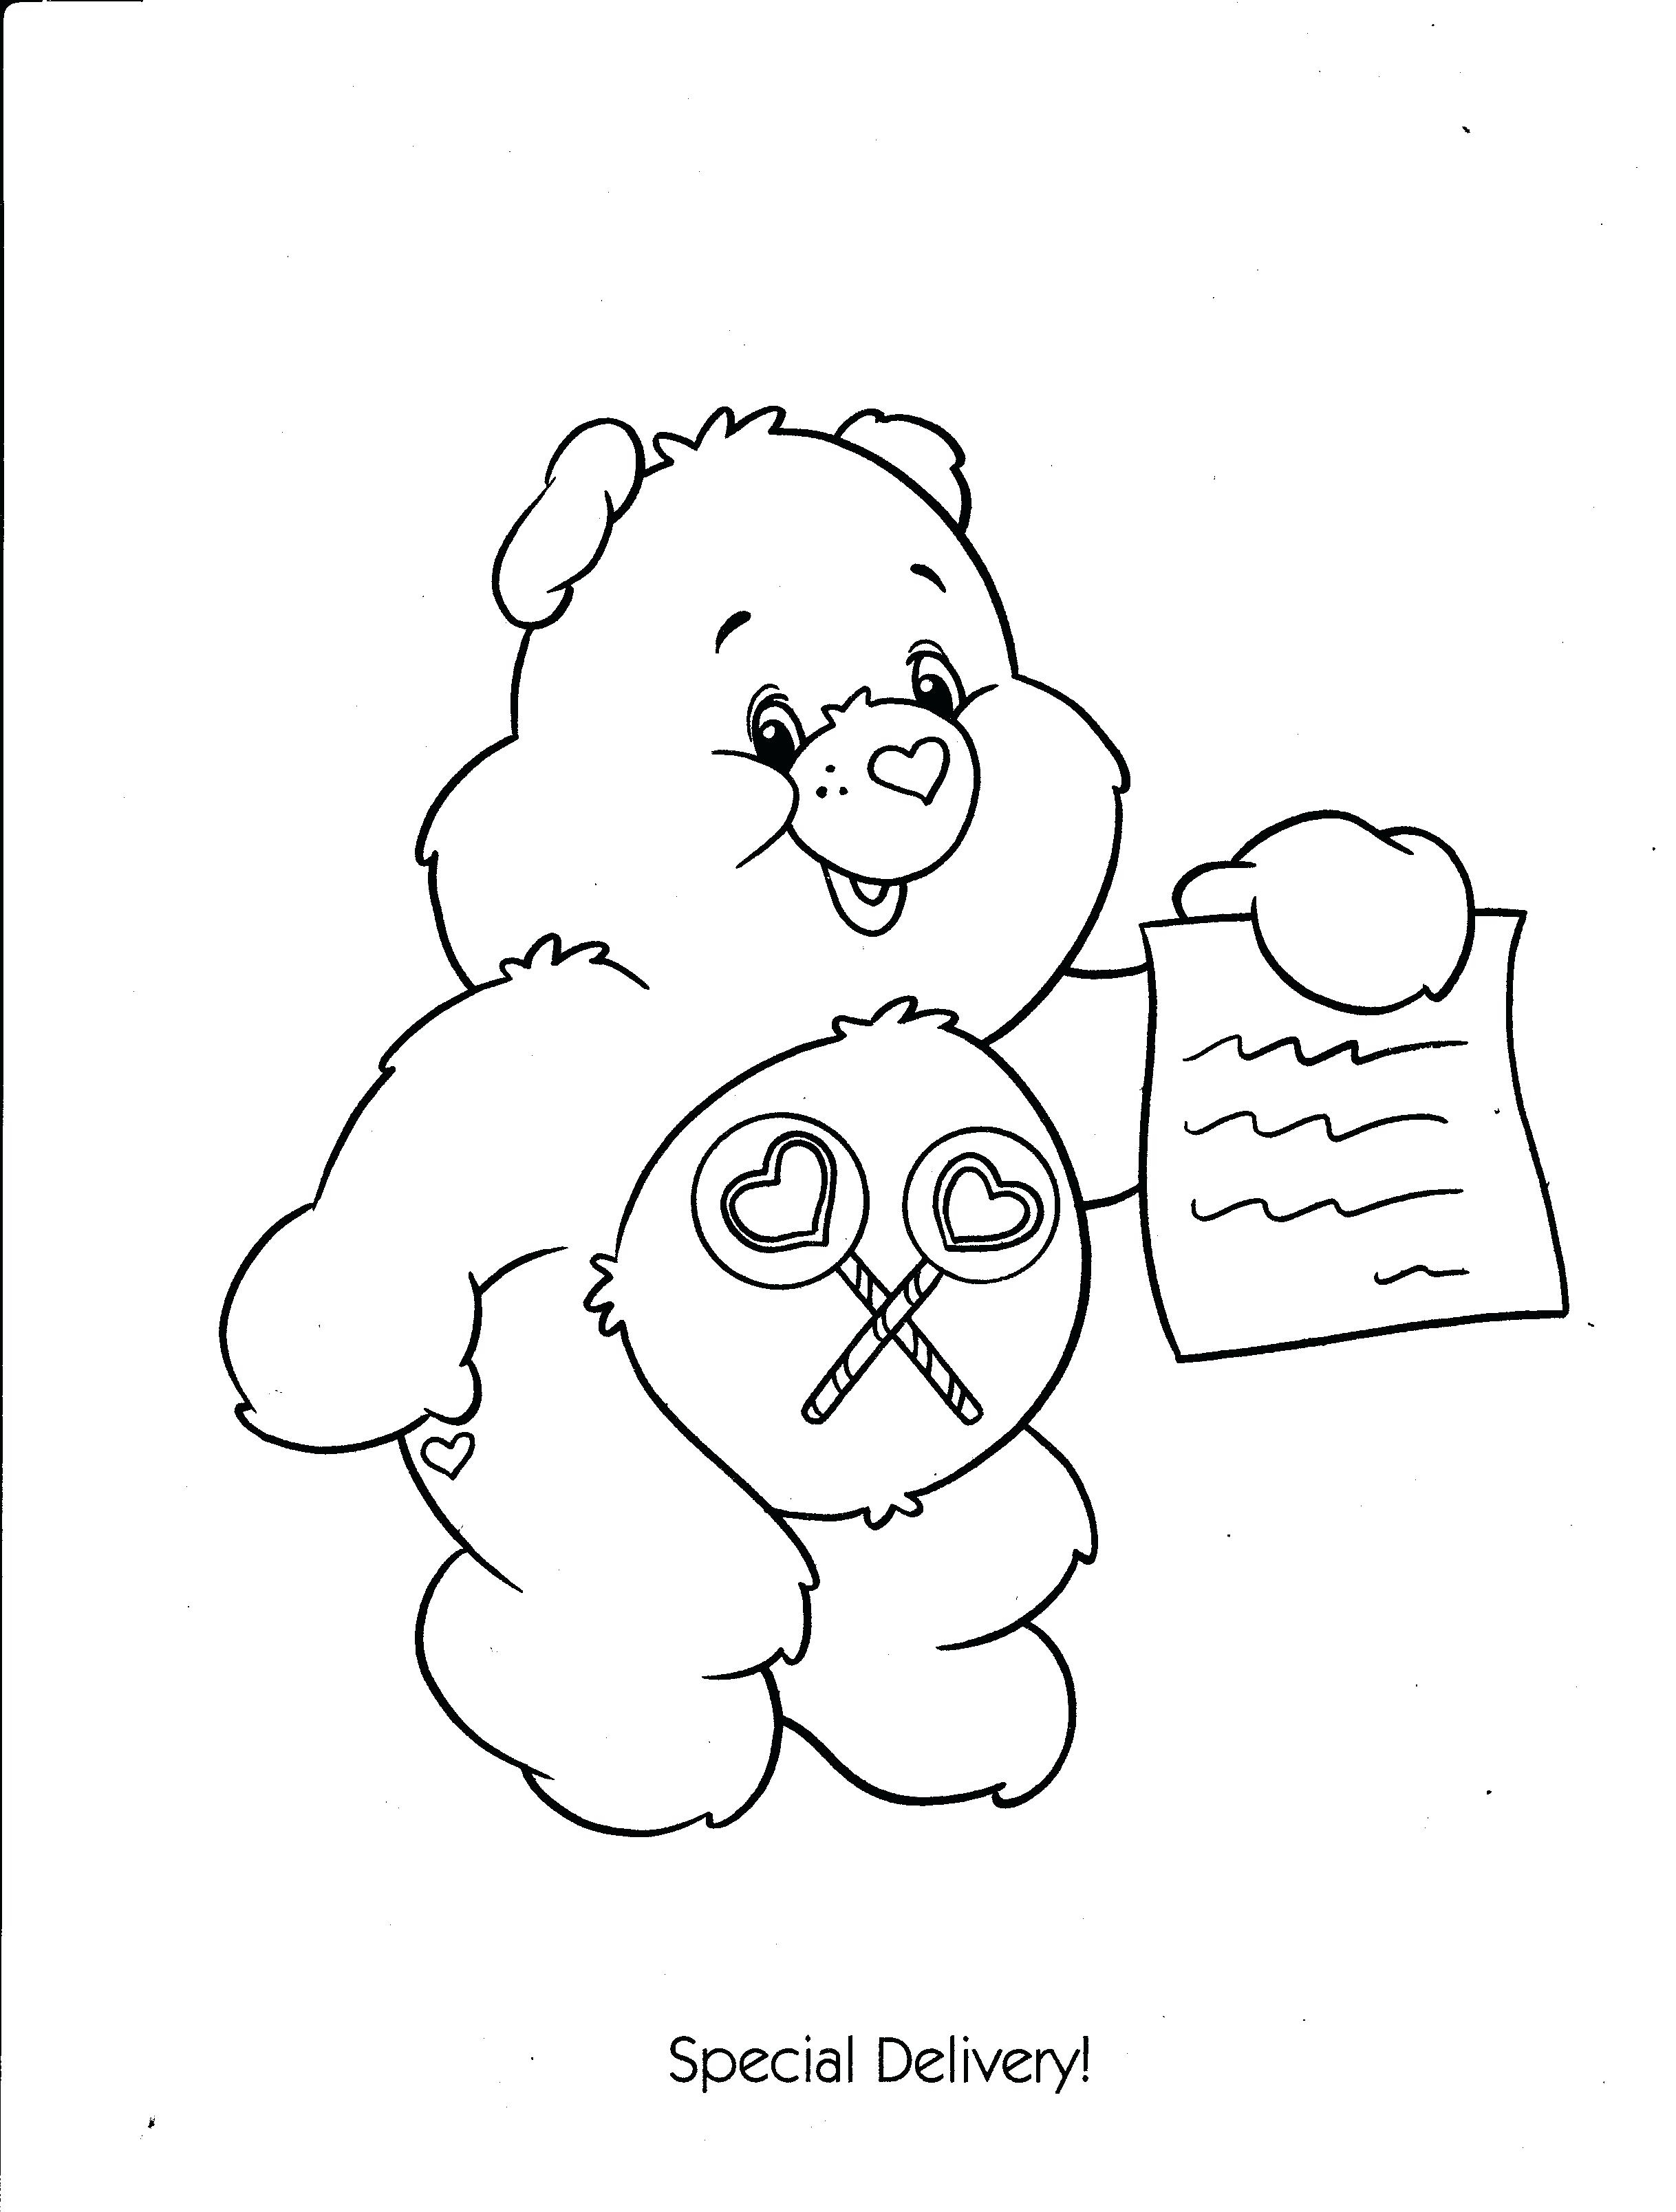 Free Care Bear Coloring Pages Care Bears Coloring Sheets Page Polar Bear Pages For Toddlers Free